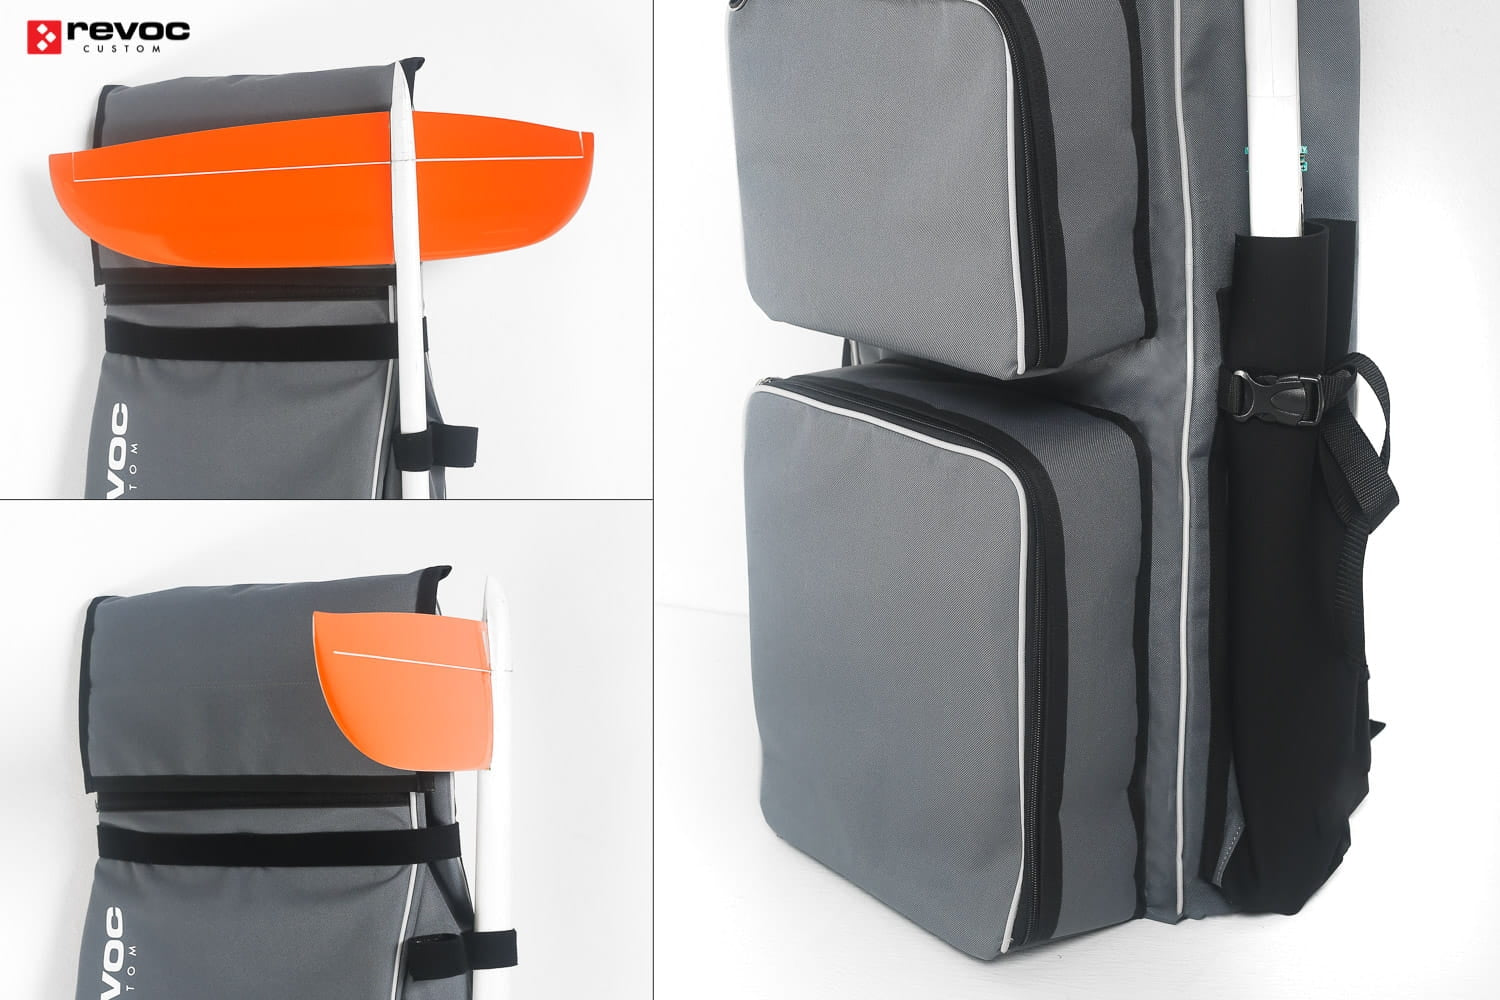 Revoc Double Glider Backpack with Additional Inner Pads / Separators 